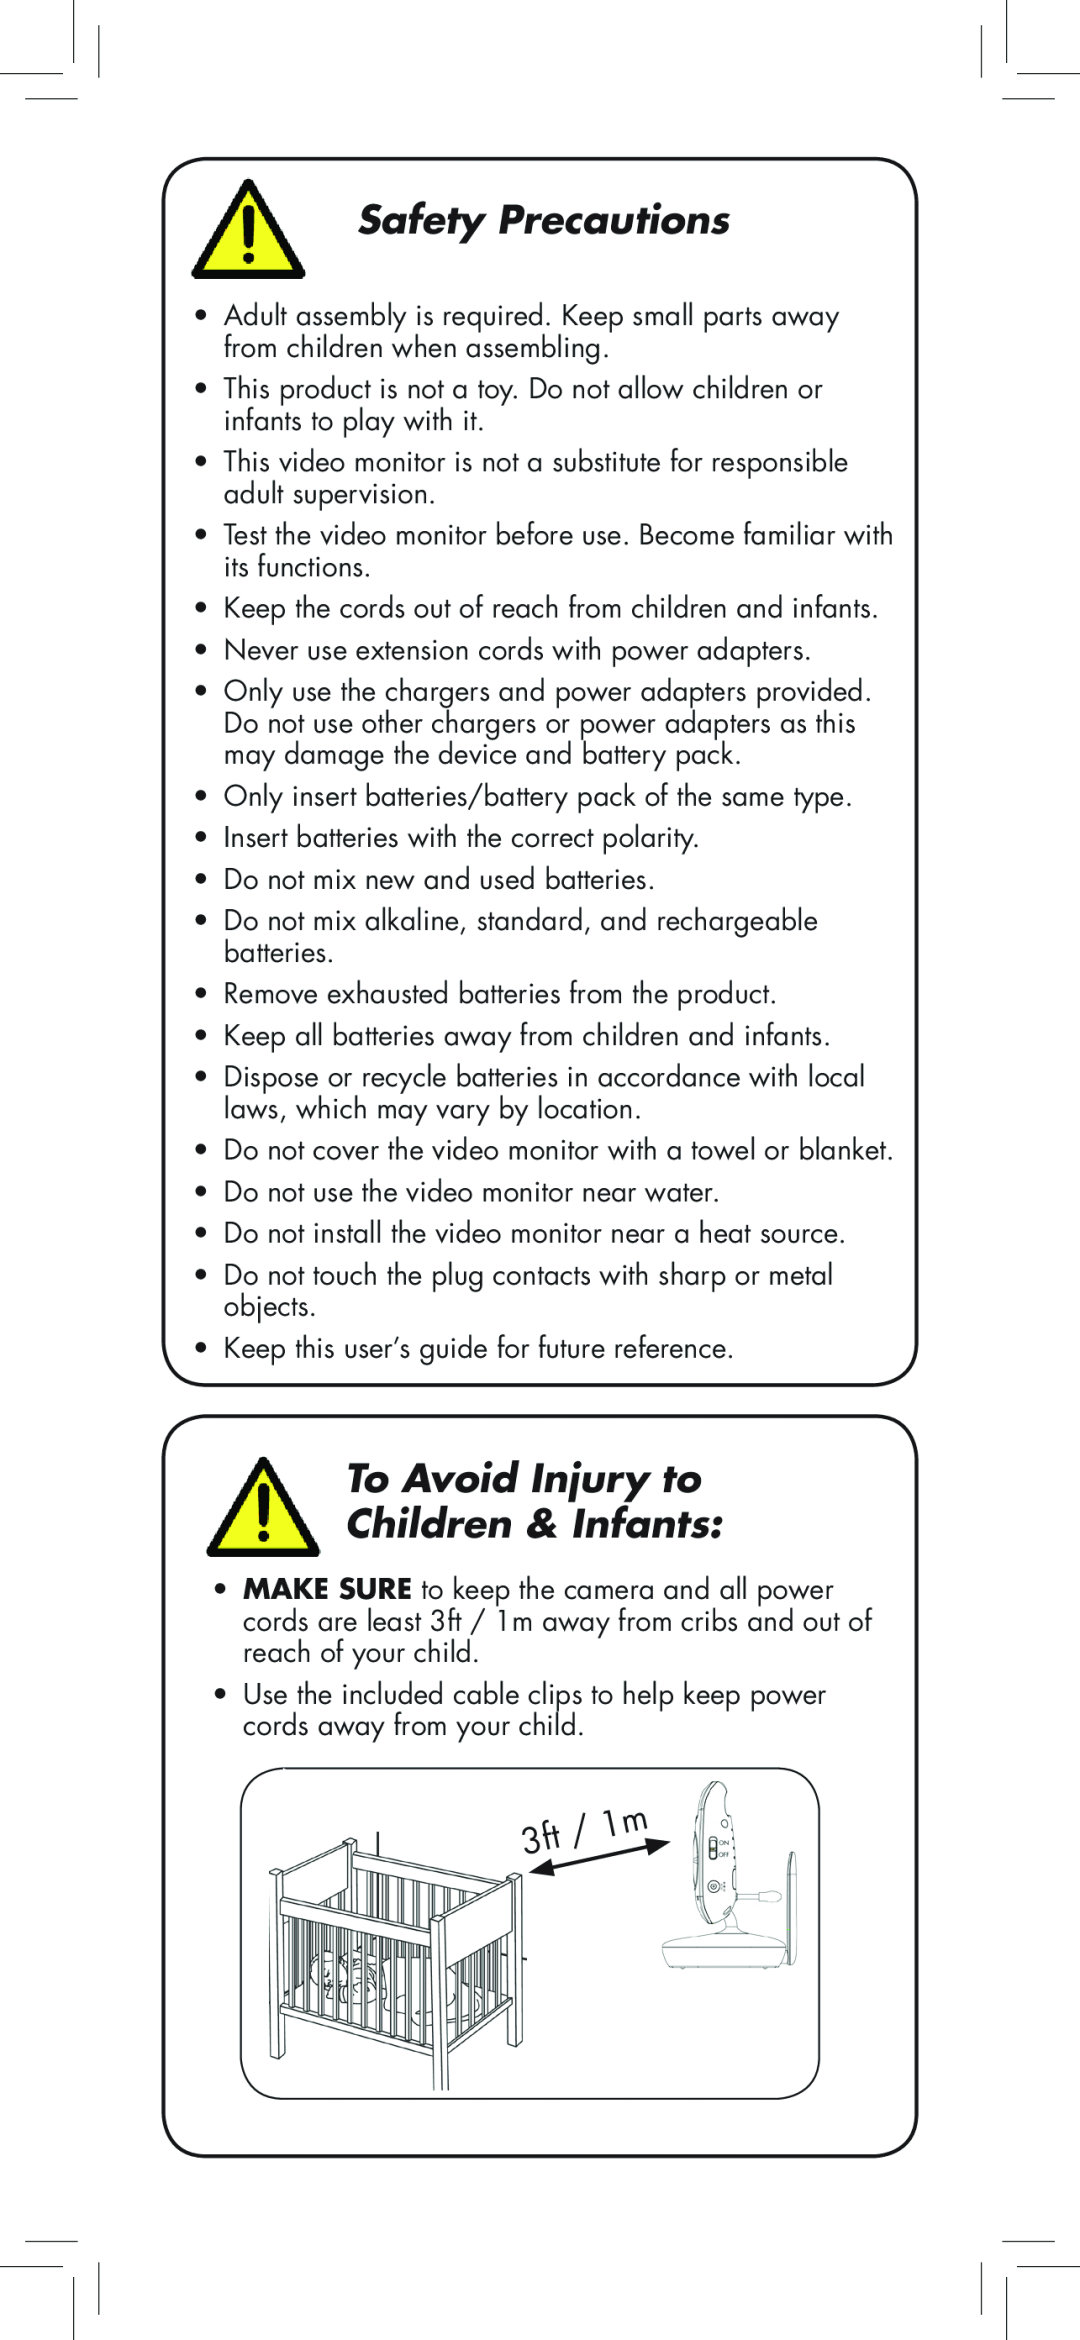 LOREX Technology BB2411 manual Safety Precautions, To Avoid Injury to Children & Infants 